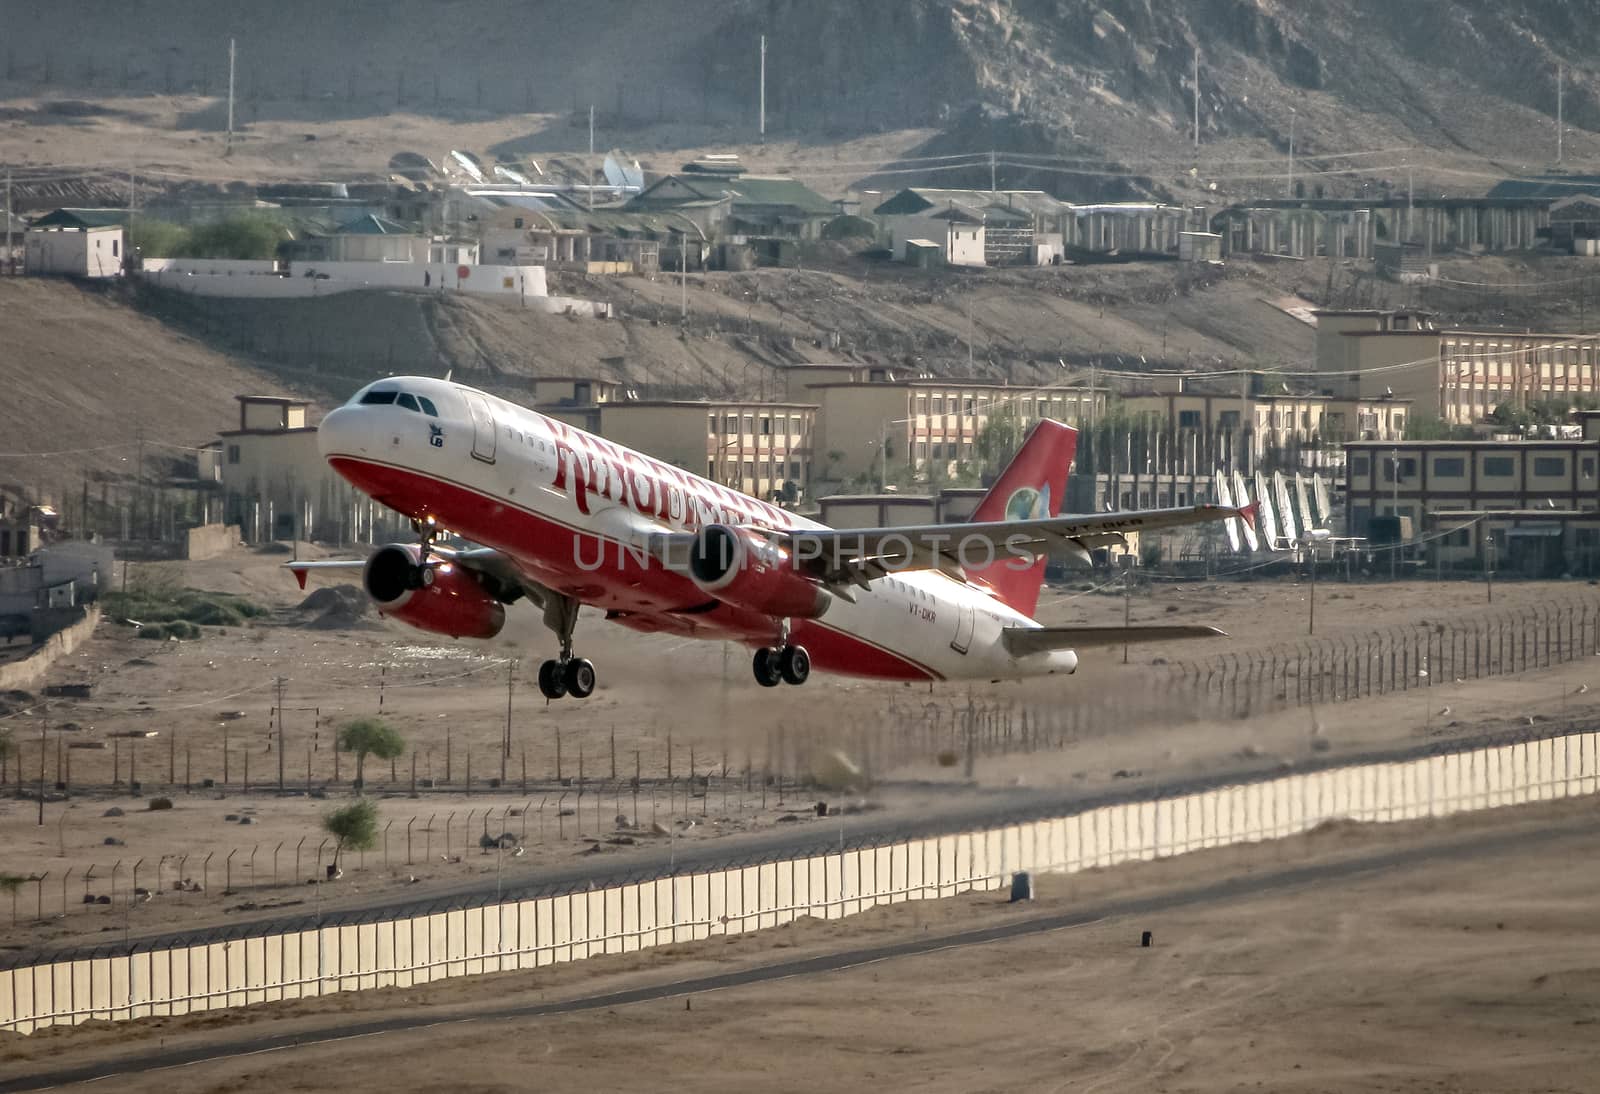 Leh, Jammu and Kashmir, India - June 26, 2011 : Kingfisher Airlines airbus A-320 # VT-DKR takes off from Leh